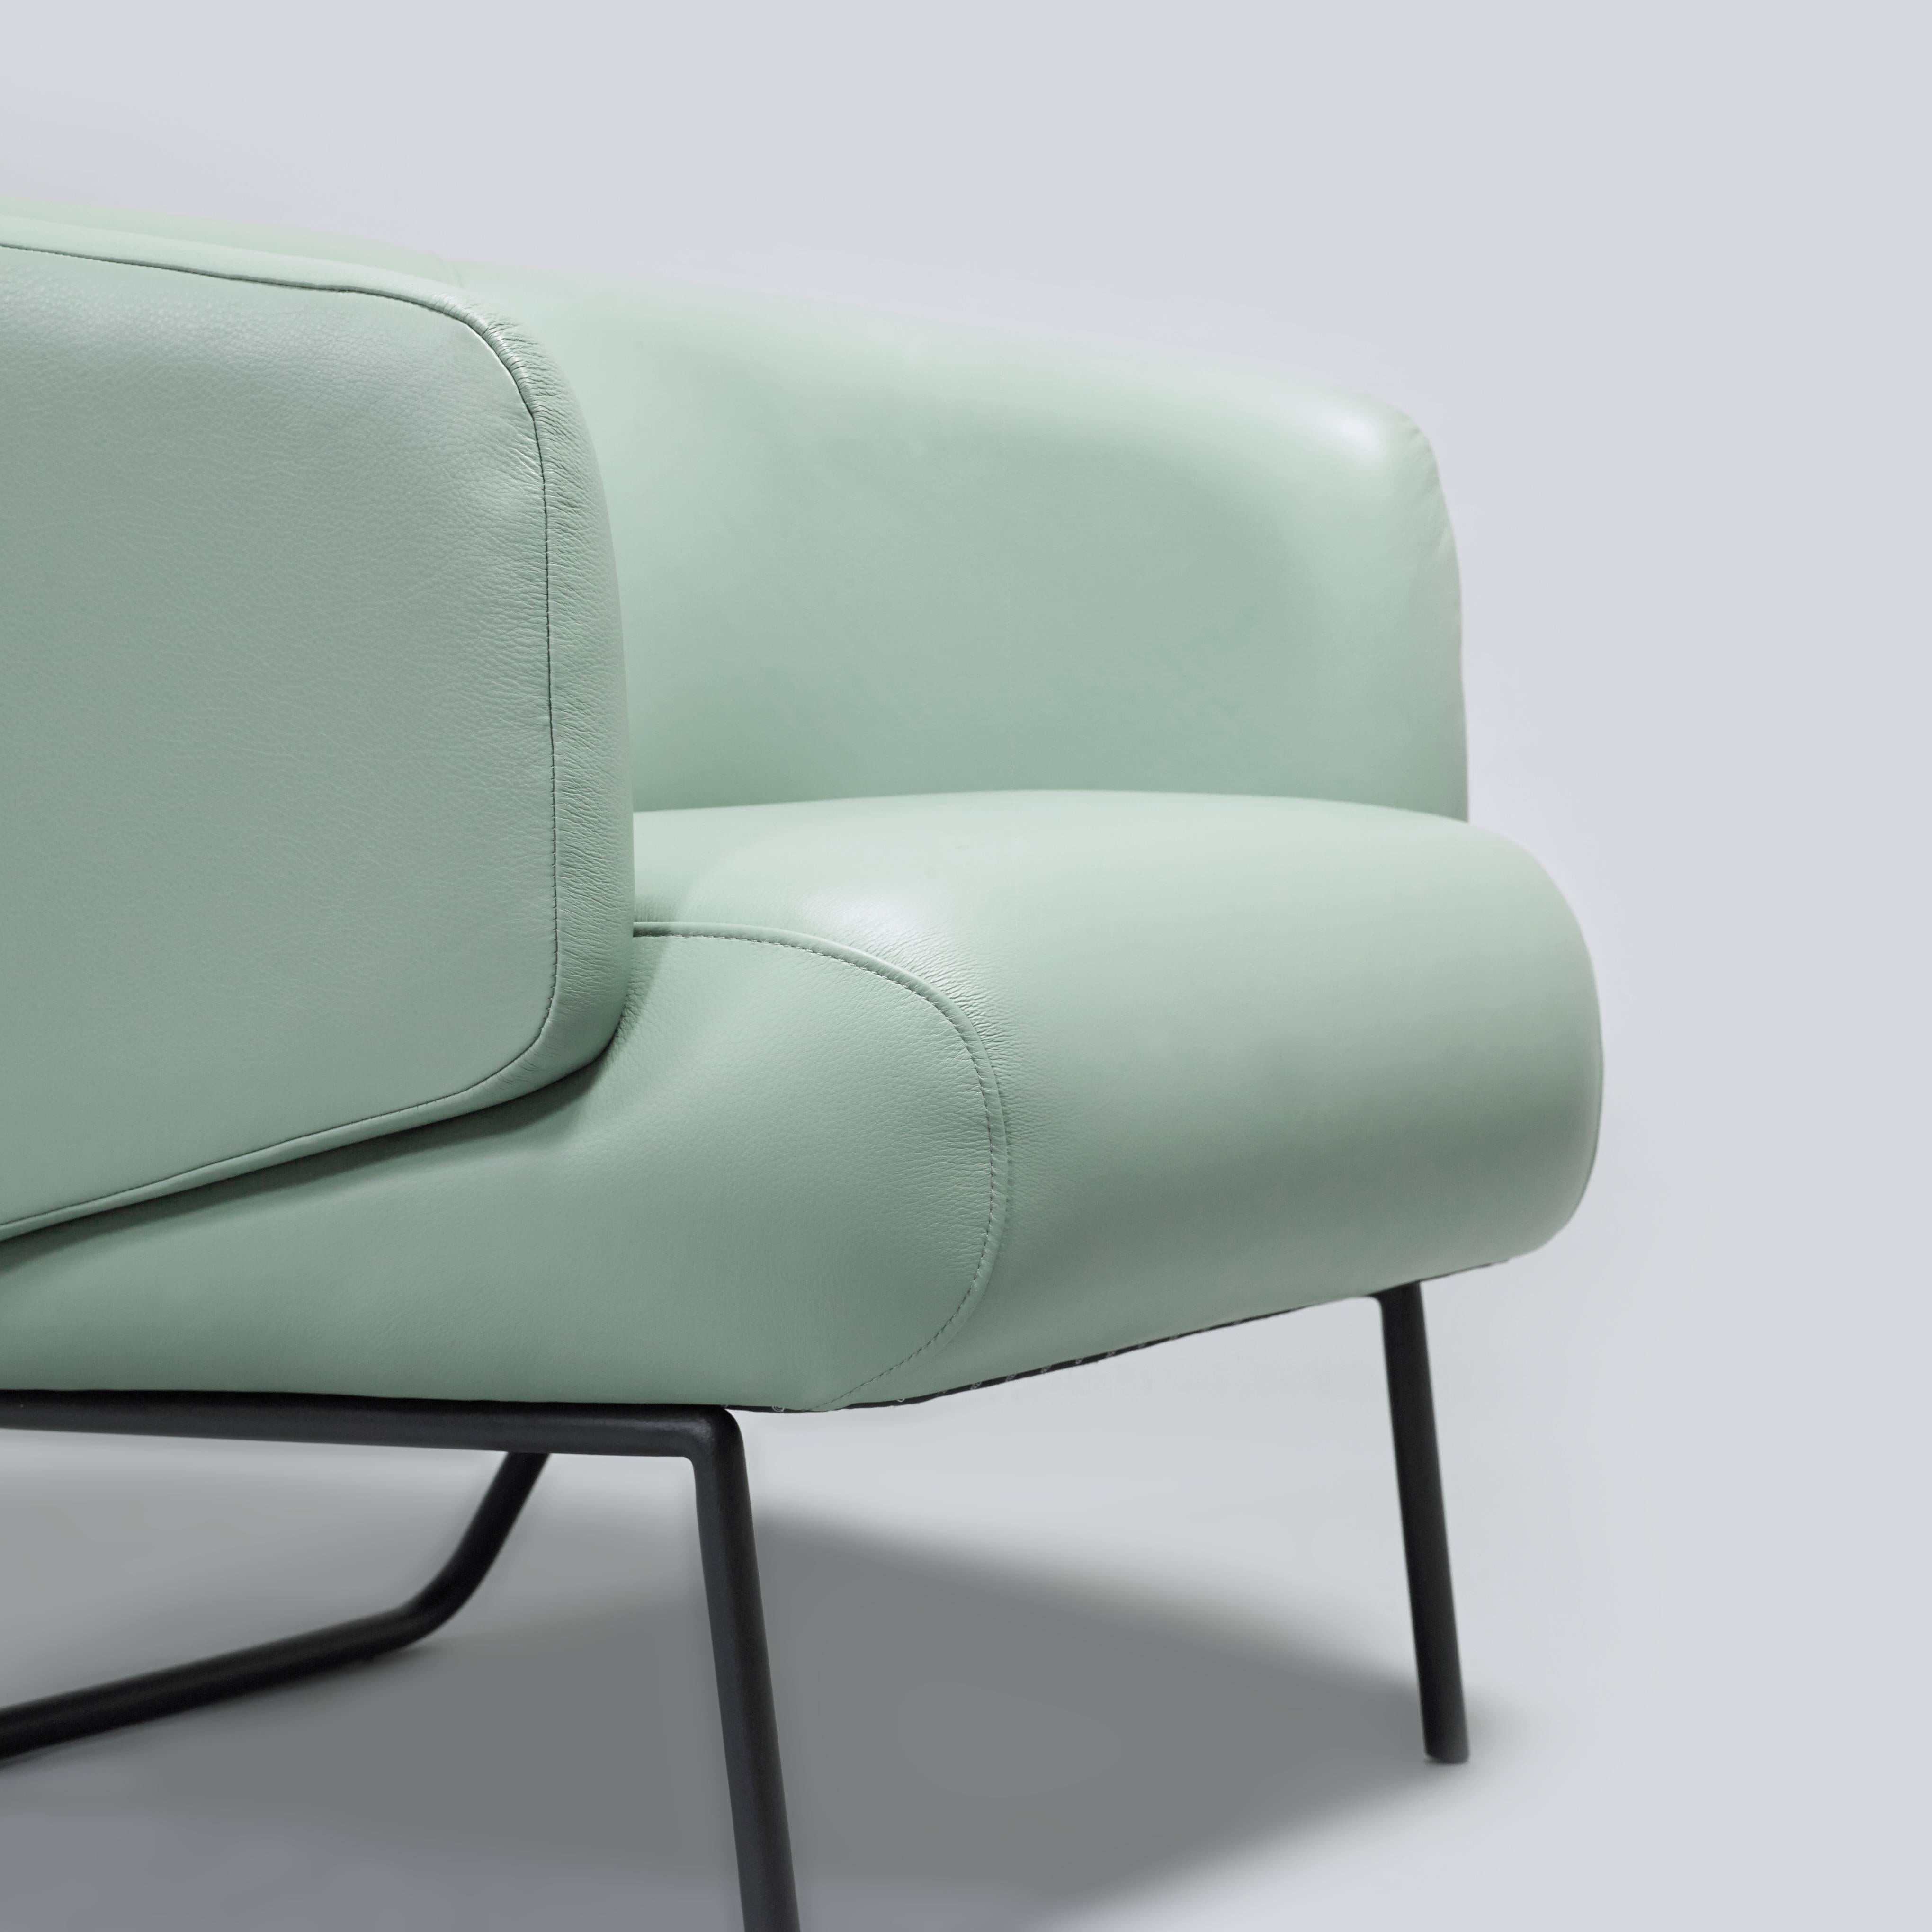 Portuguese European modern pale teal green leather and black epoxy armchairs For Sale